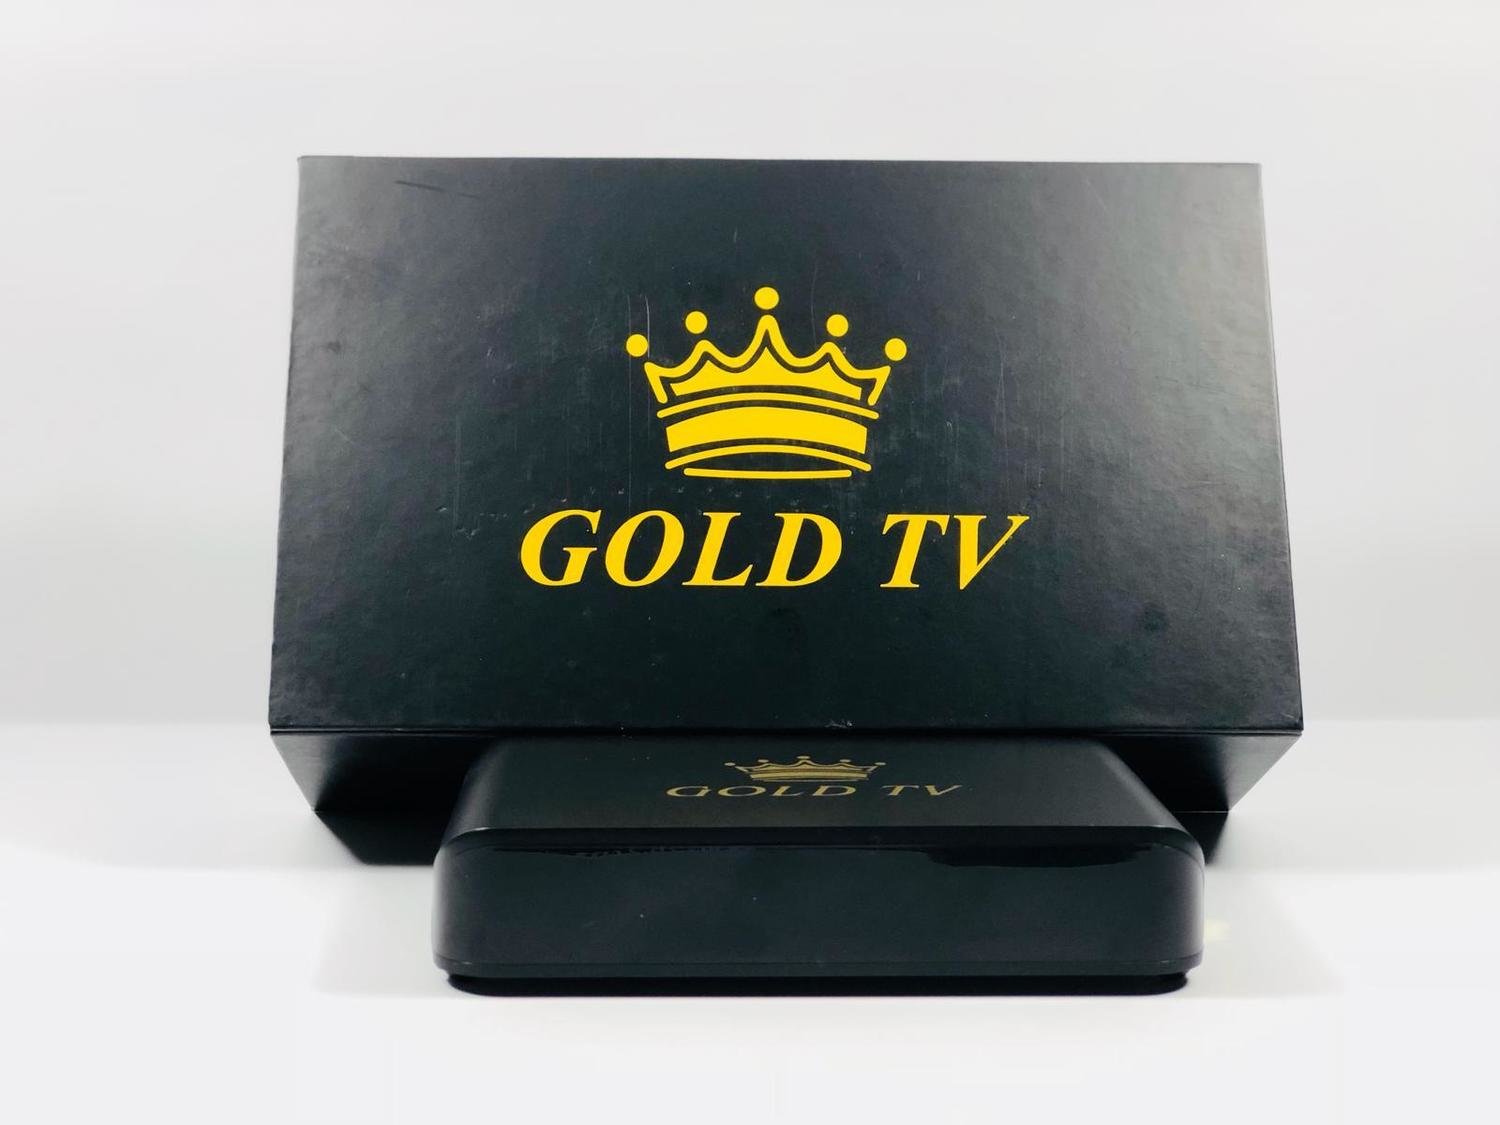 Black IPTV box with the GOLD TV logo in yellow